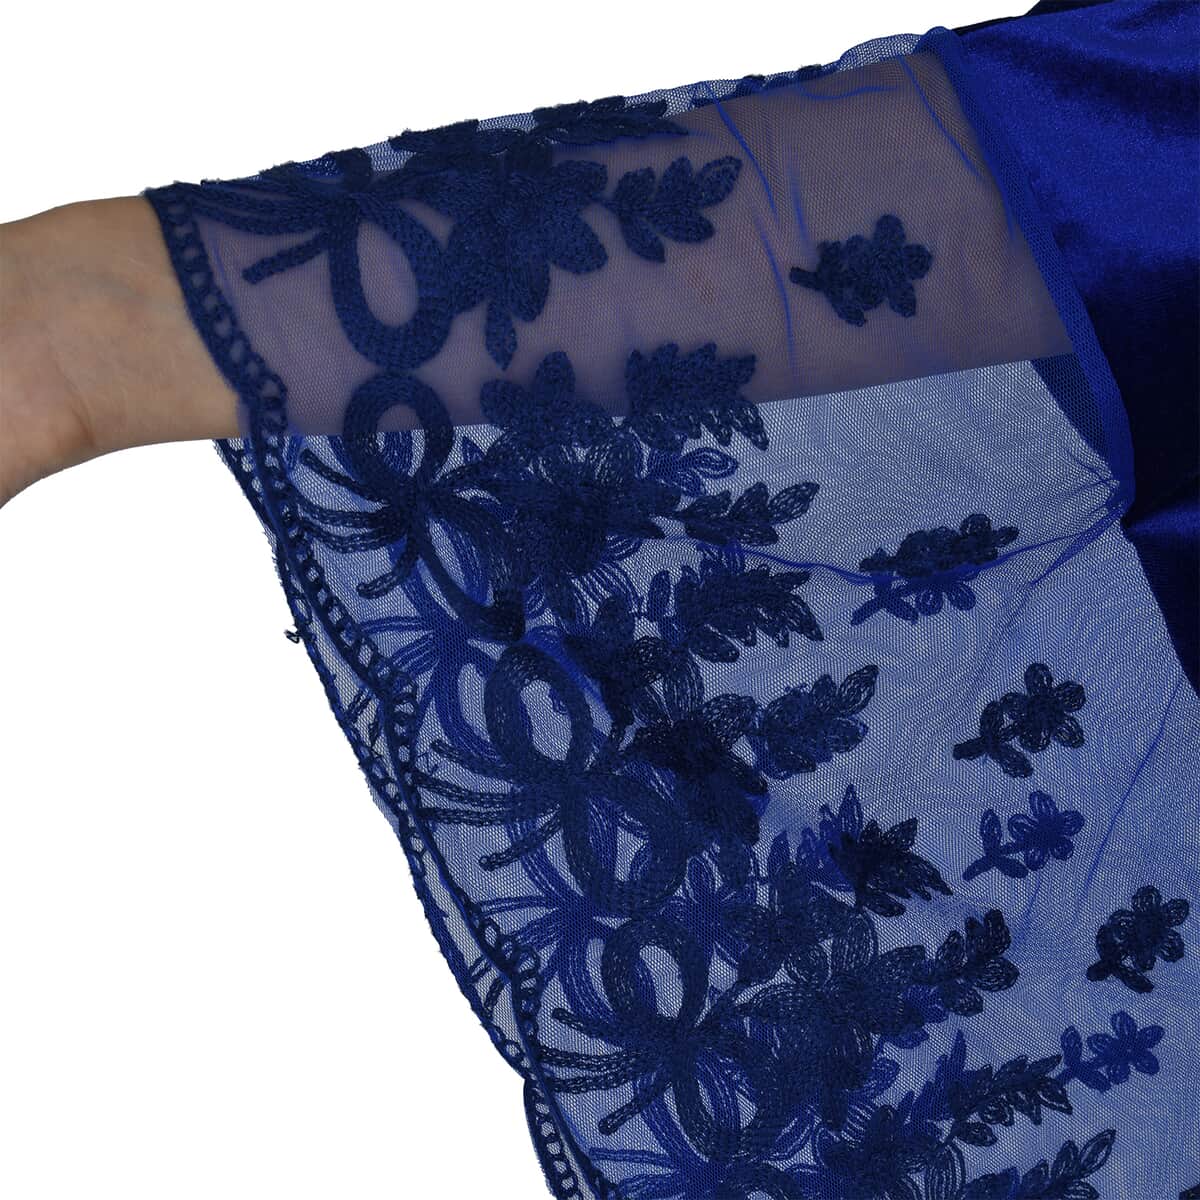 Tamsy Black Label - Lux Stretch Velvet Kaftan with Lace in Royal Blue - One Size Fits Most image number 4